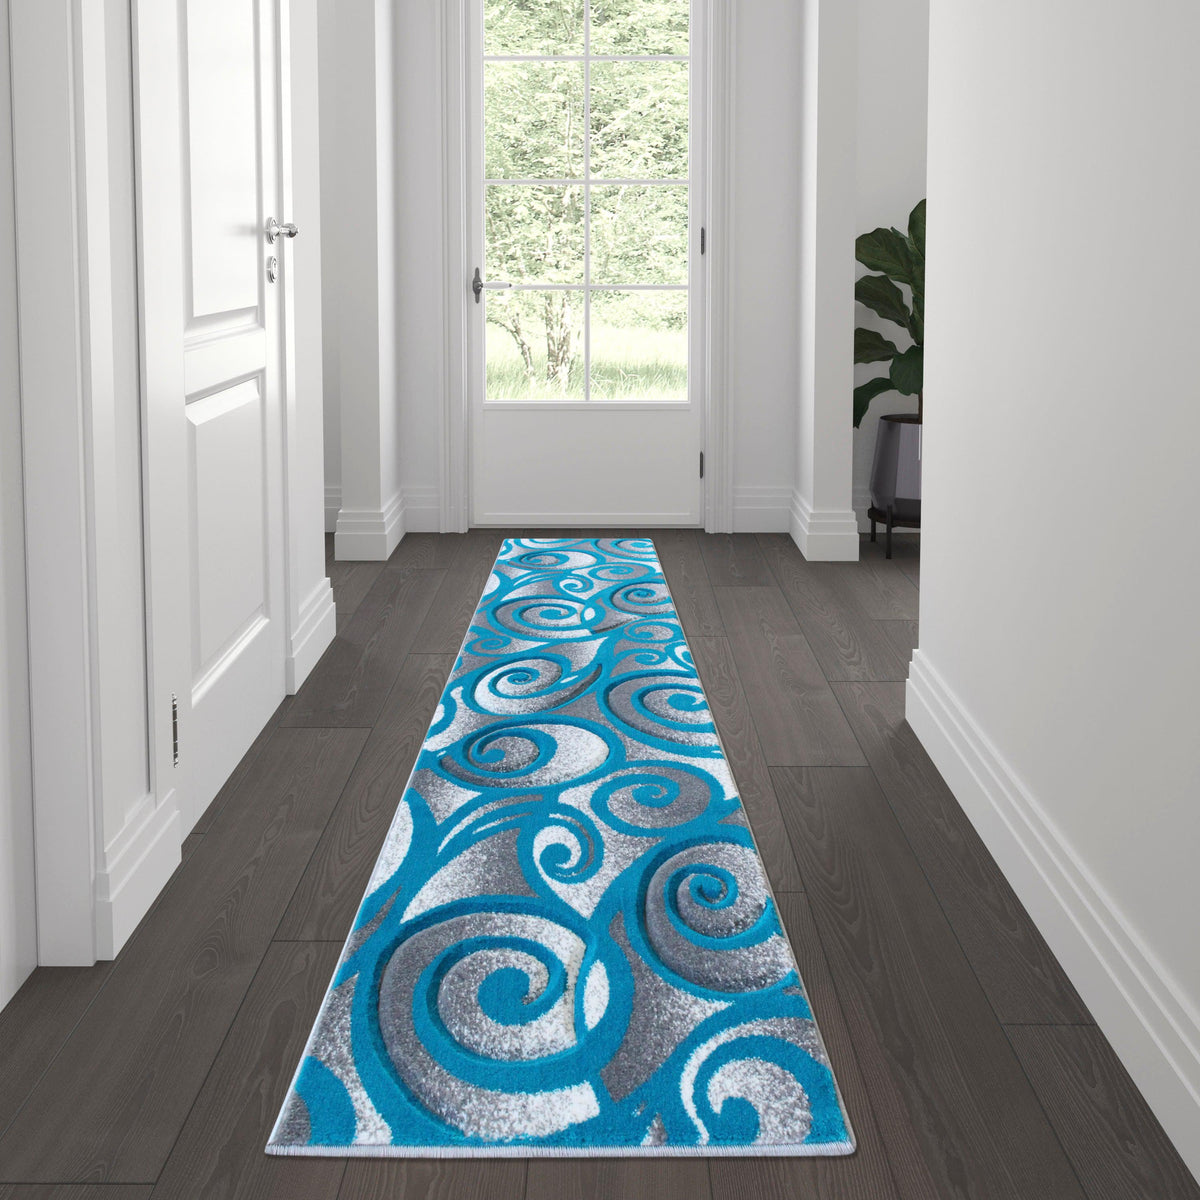 Turquoise,2' x 7' |#| Swirled High-Low Pile Sculpted Multipurpose Area Rug in Turquoise - 2' x 7'